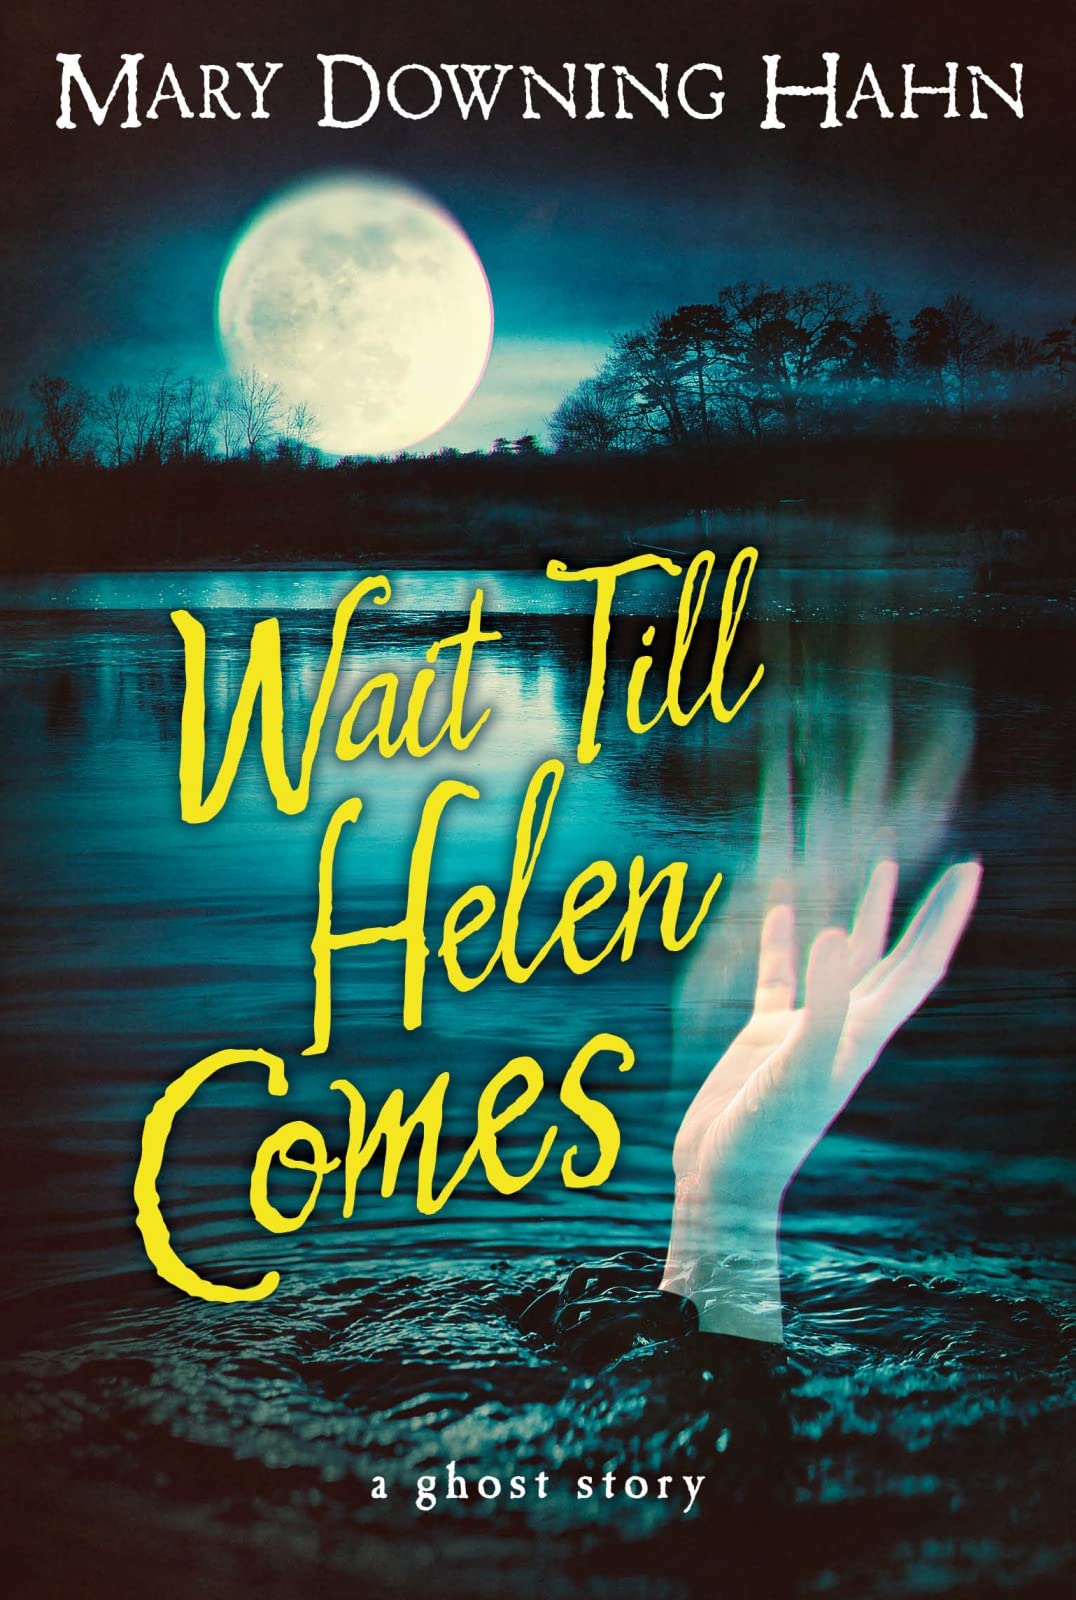 Wait Till Helen Comes by Mary Downing Hahn - middle school books